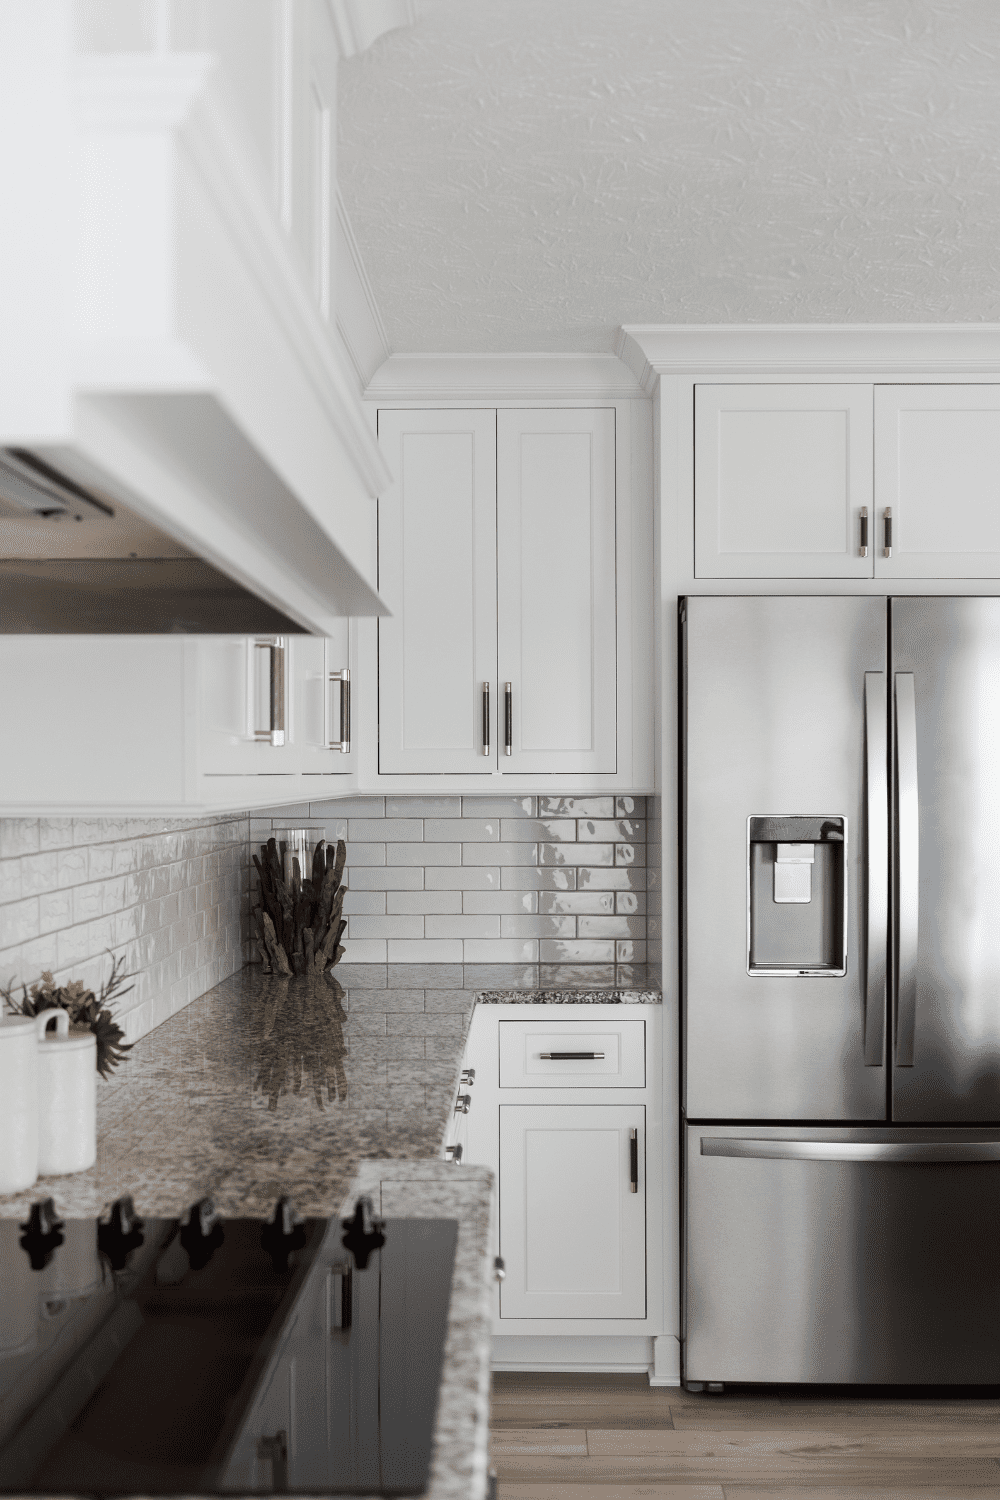 Nicholas Design Build | A white kitchen with a stainless steel refrigerator.